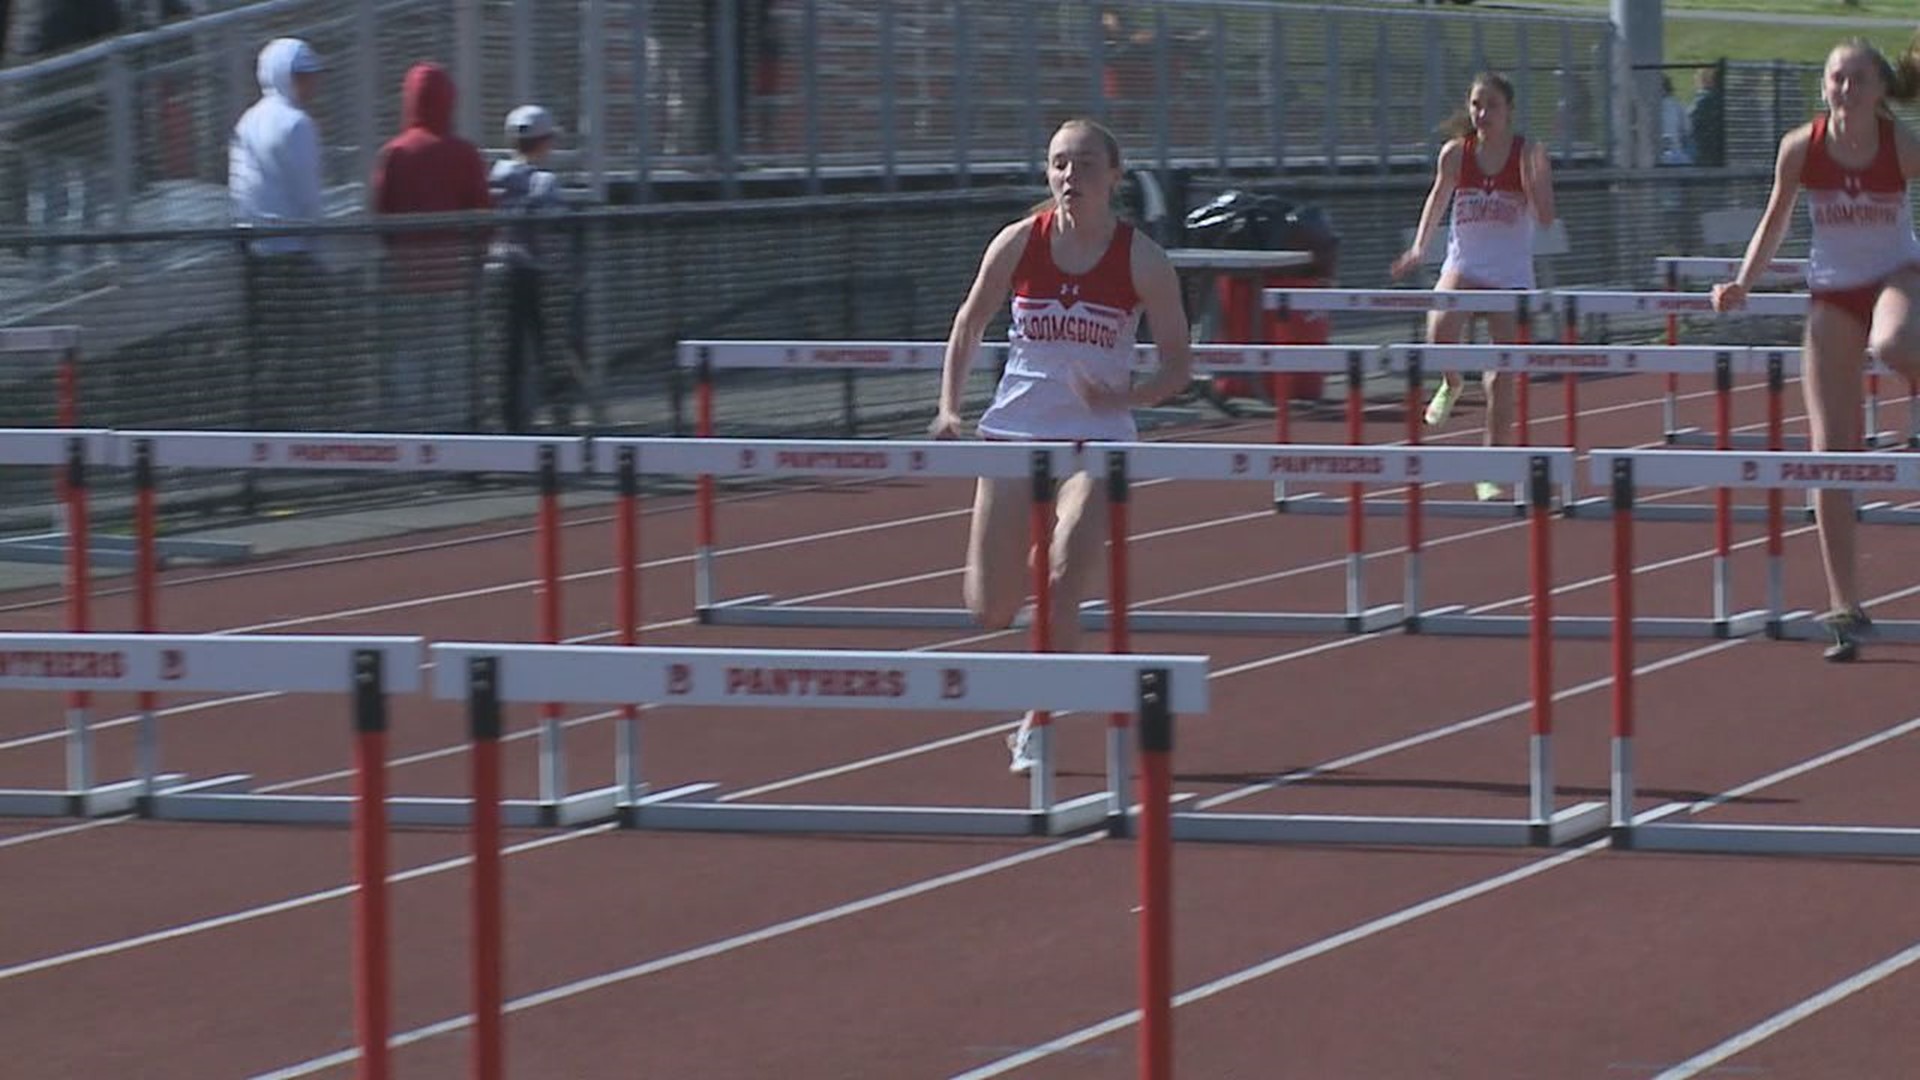 CHARLY SCHLAUCH (SCHLOUCK) FROM BLOOMSBURG
WINS THE GIRL'S 100 HURDLES...THE WINNING TIME 15.41 SECONDS